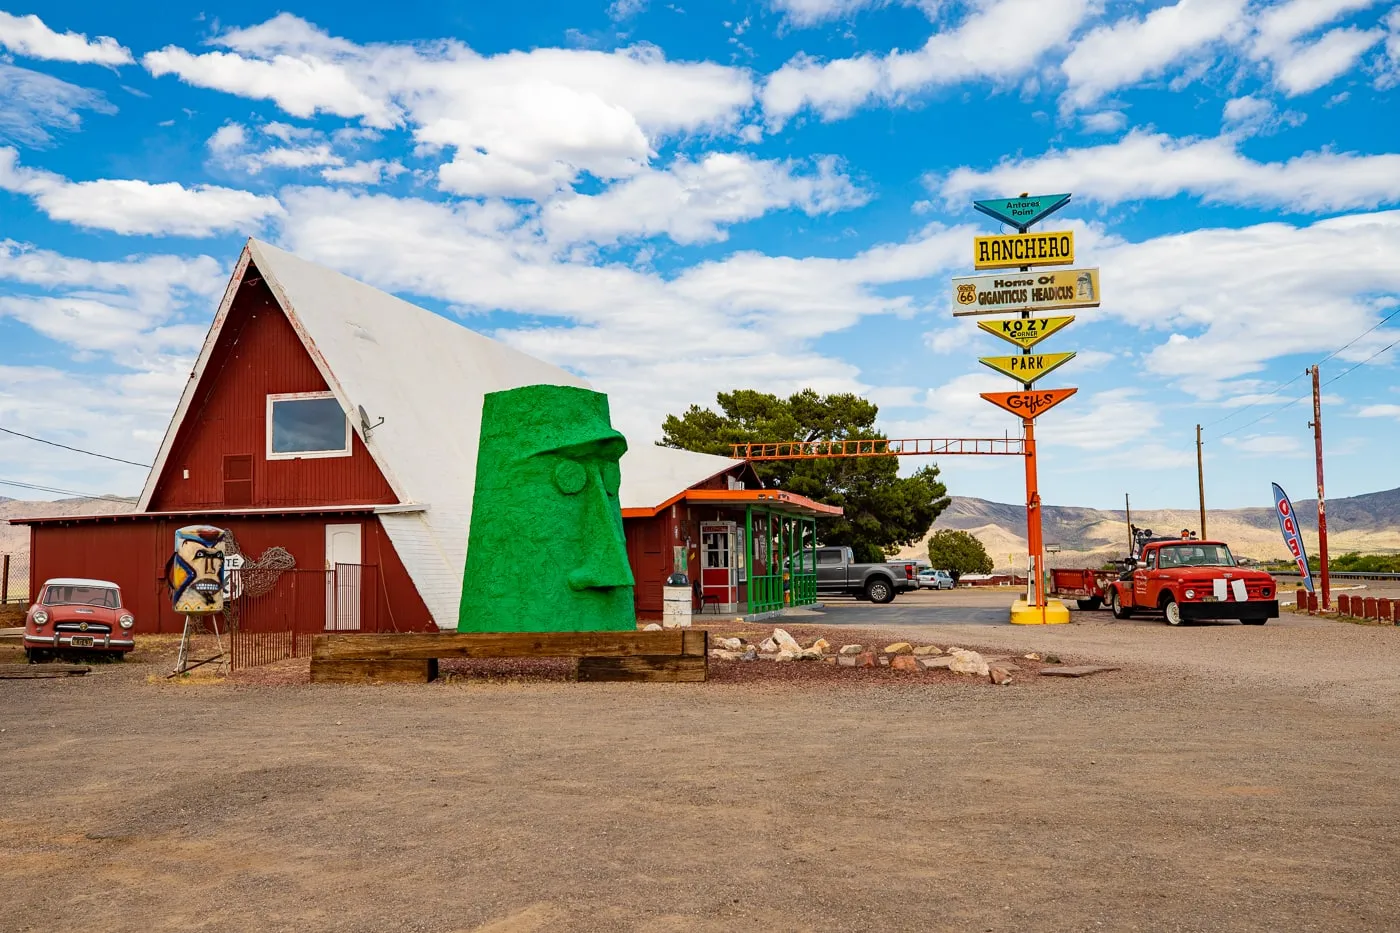 Antares Point Visitor Center & Gift Shop on Route 66 in Kingman, Arizona - home of Giganticus Headicus